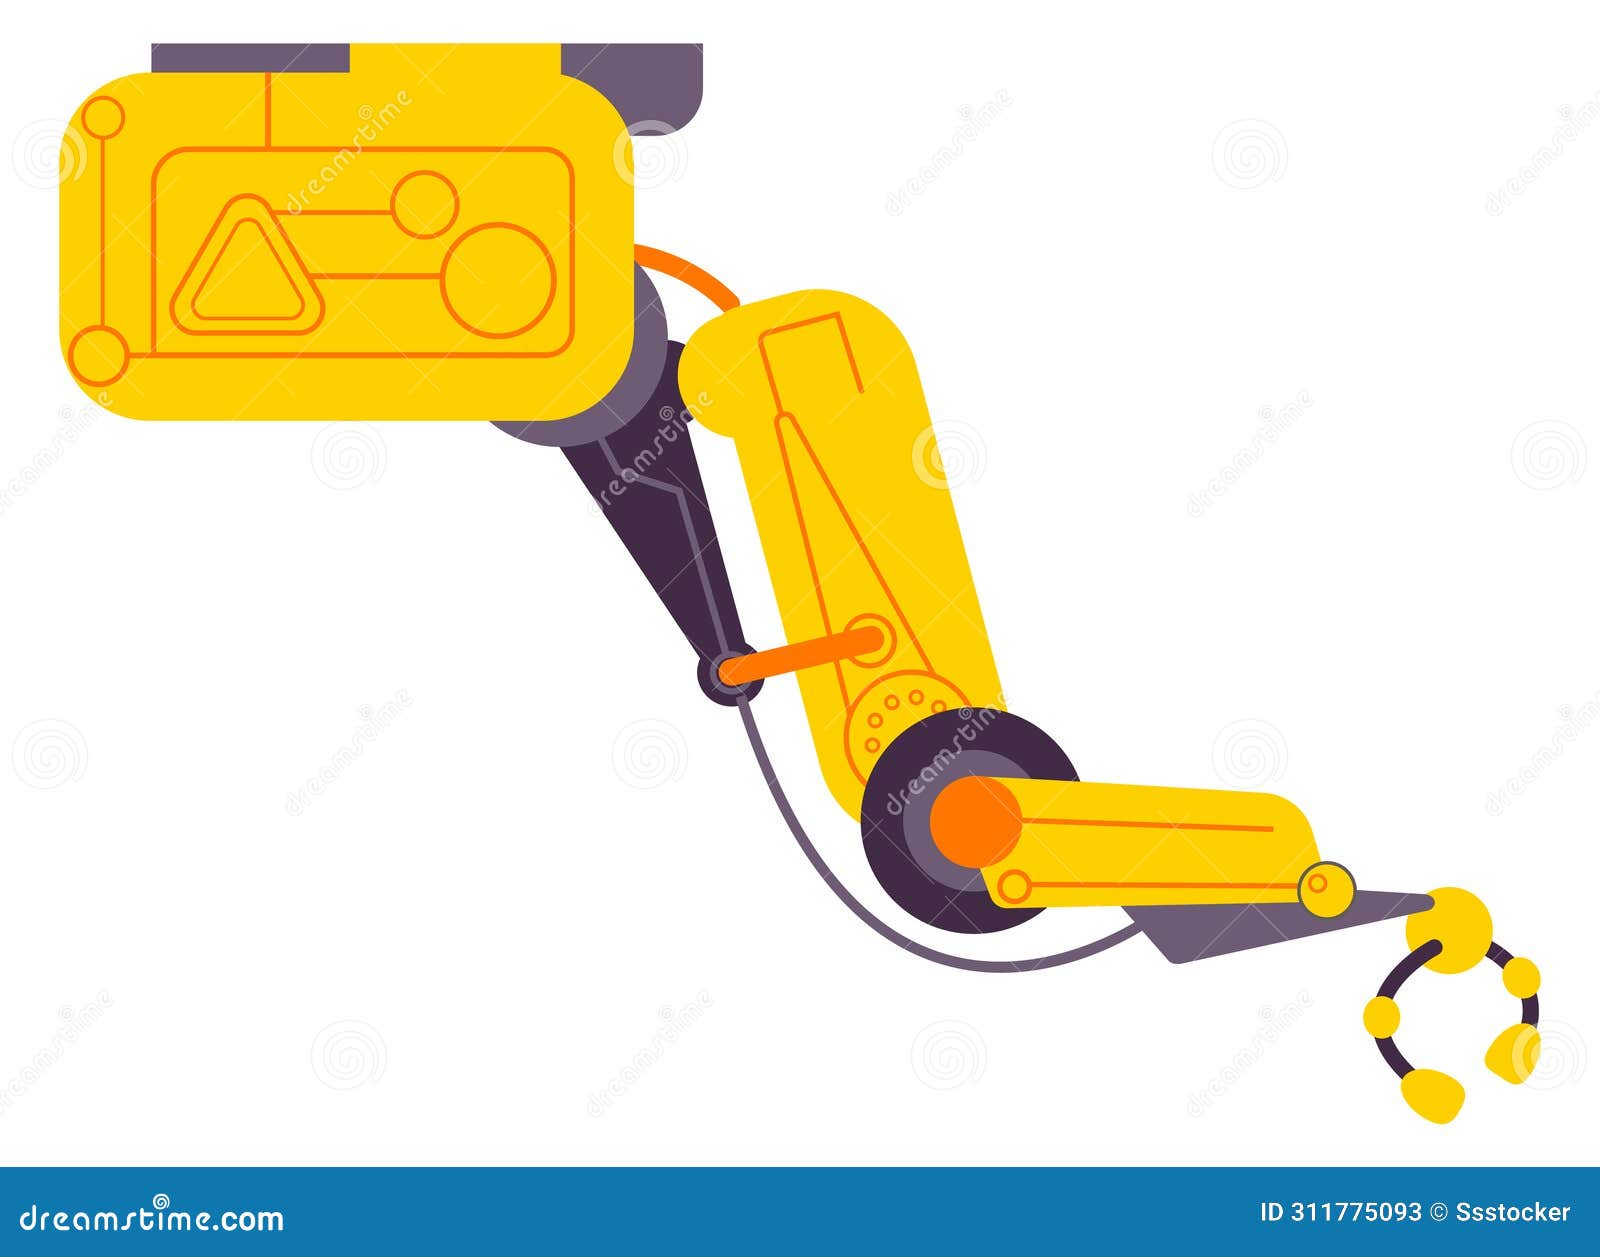 robo arm. modern engineering device. industrial technology